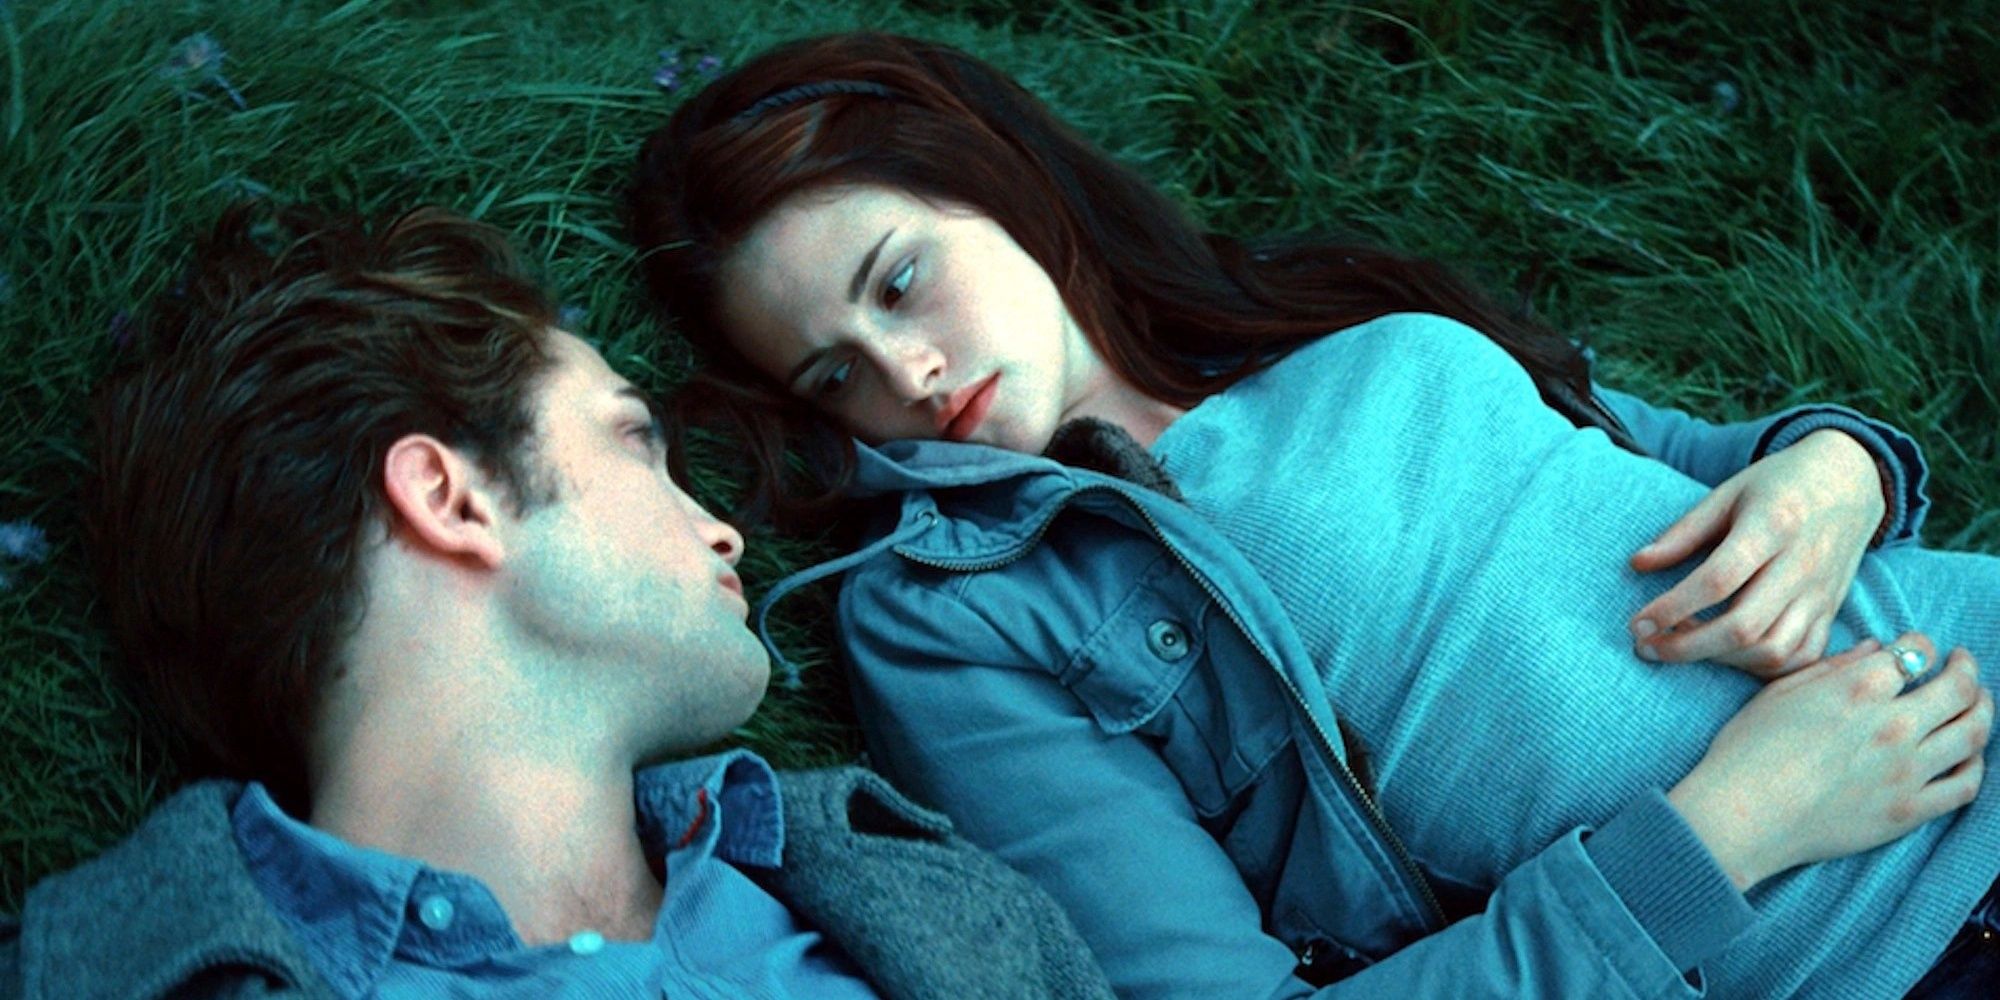 Edward and Bella lying in a field together in Twilight